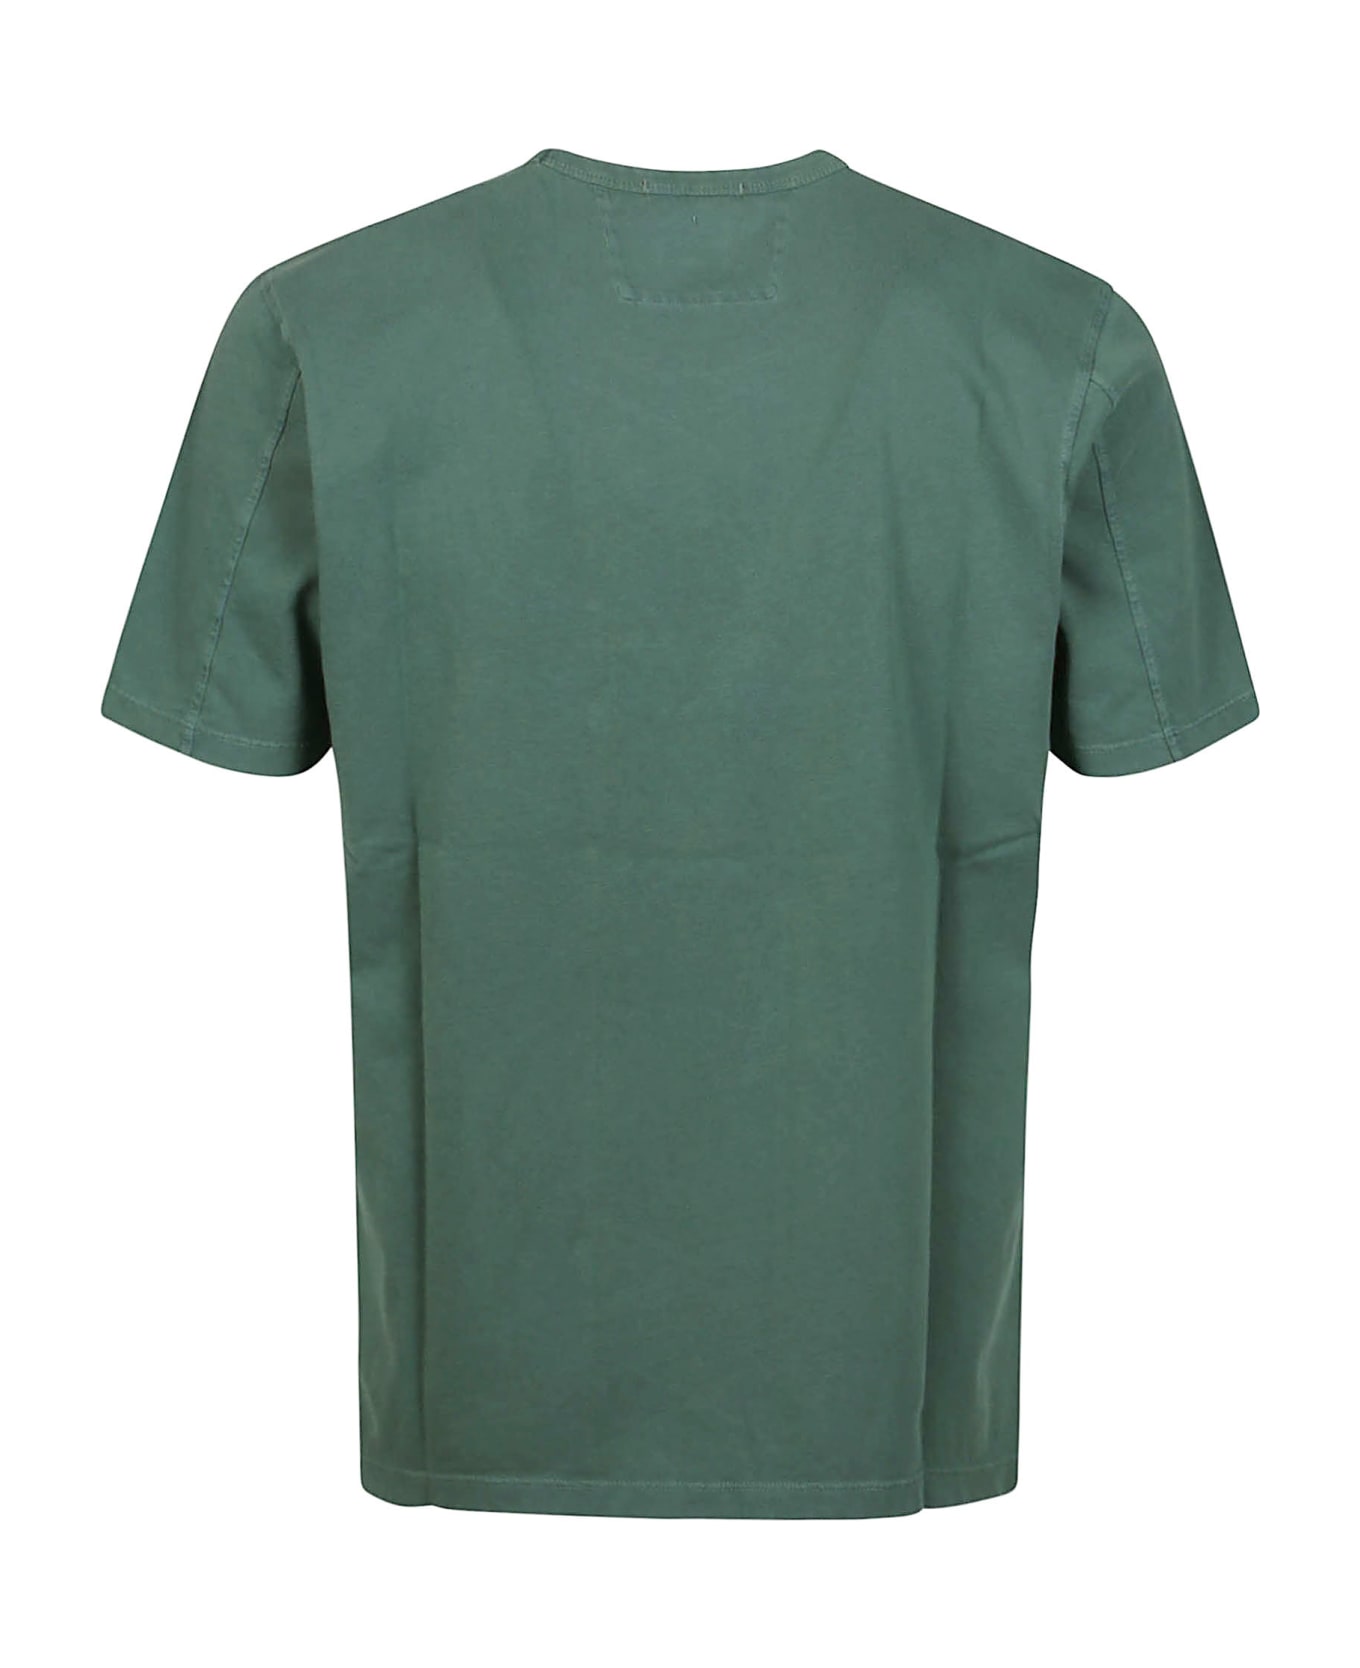 C.P. Company 24/1 Jersey Resist Dyed Logo T-shirt - Duck Green